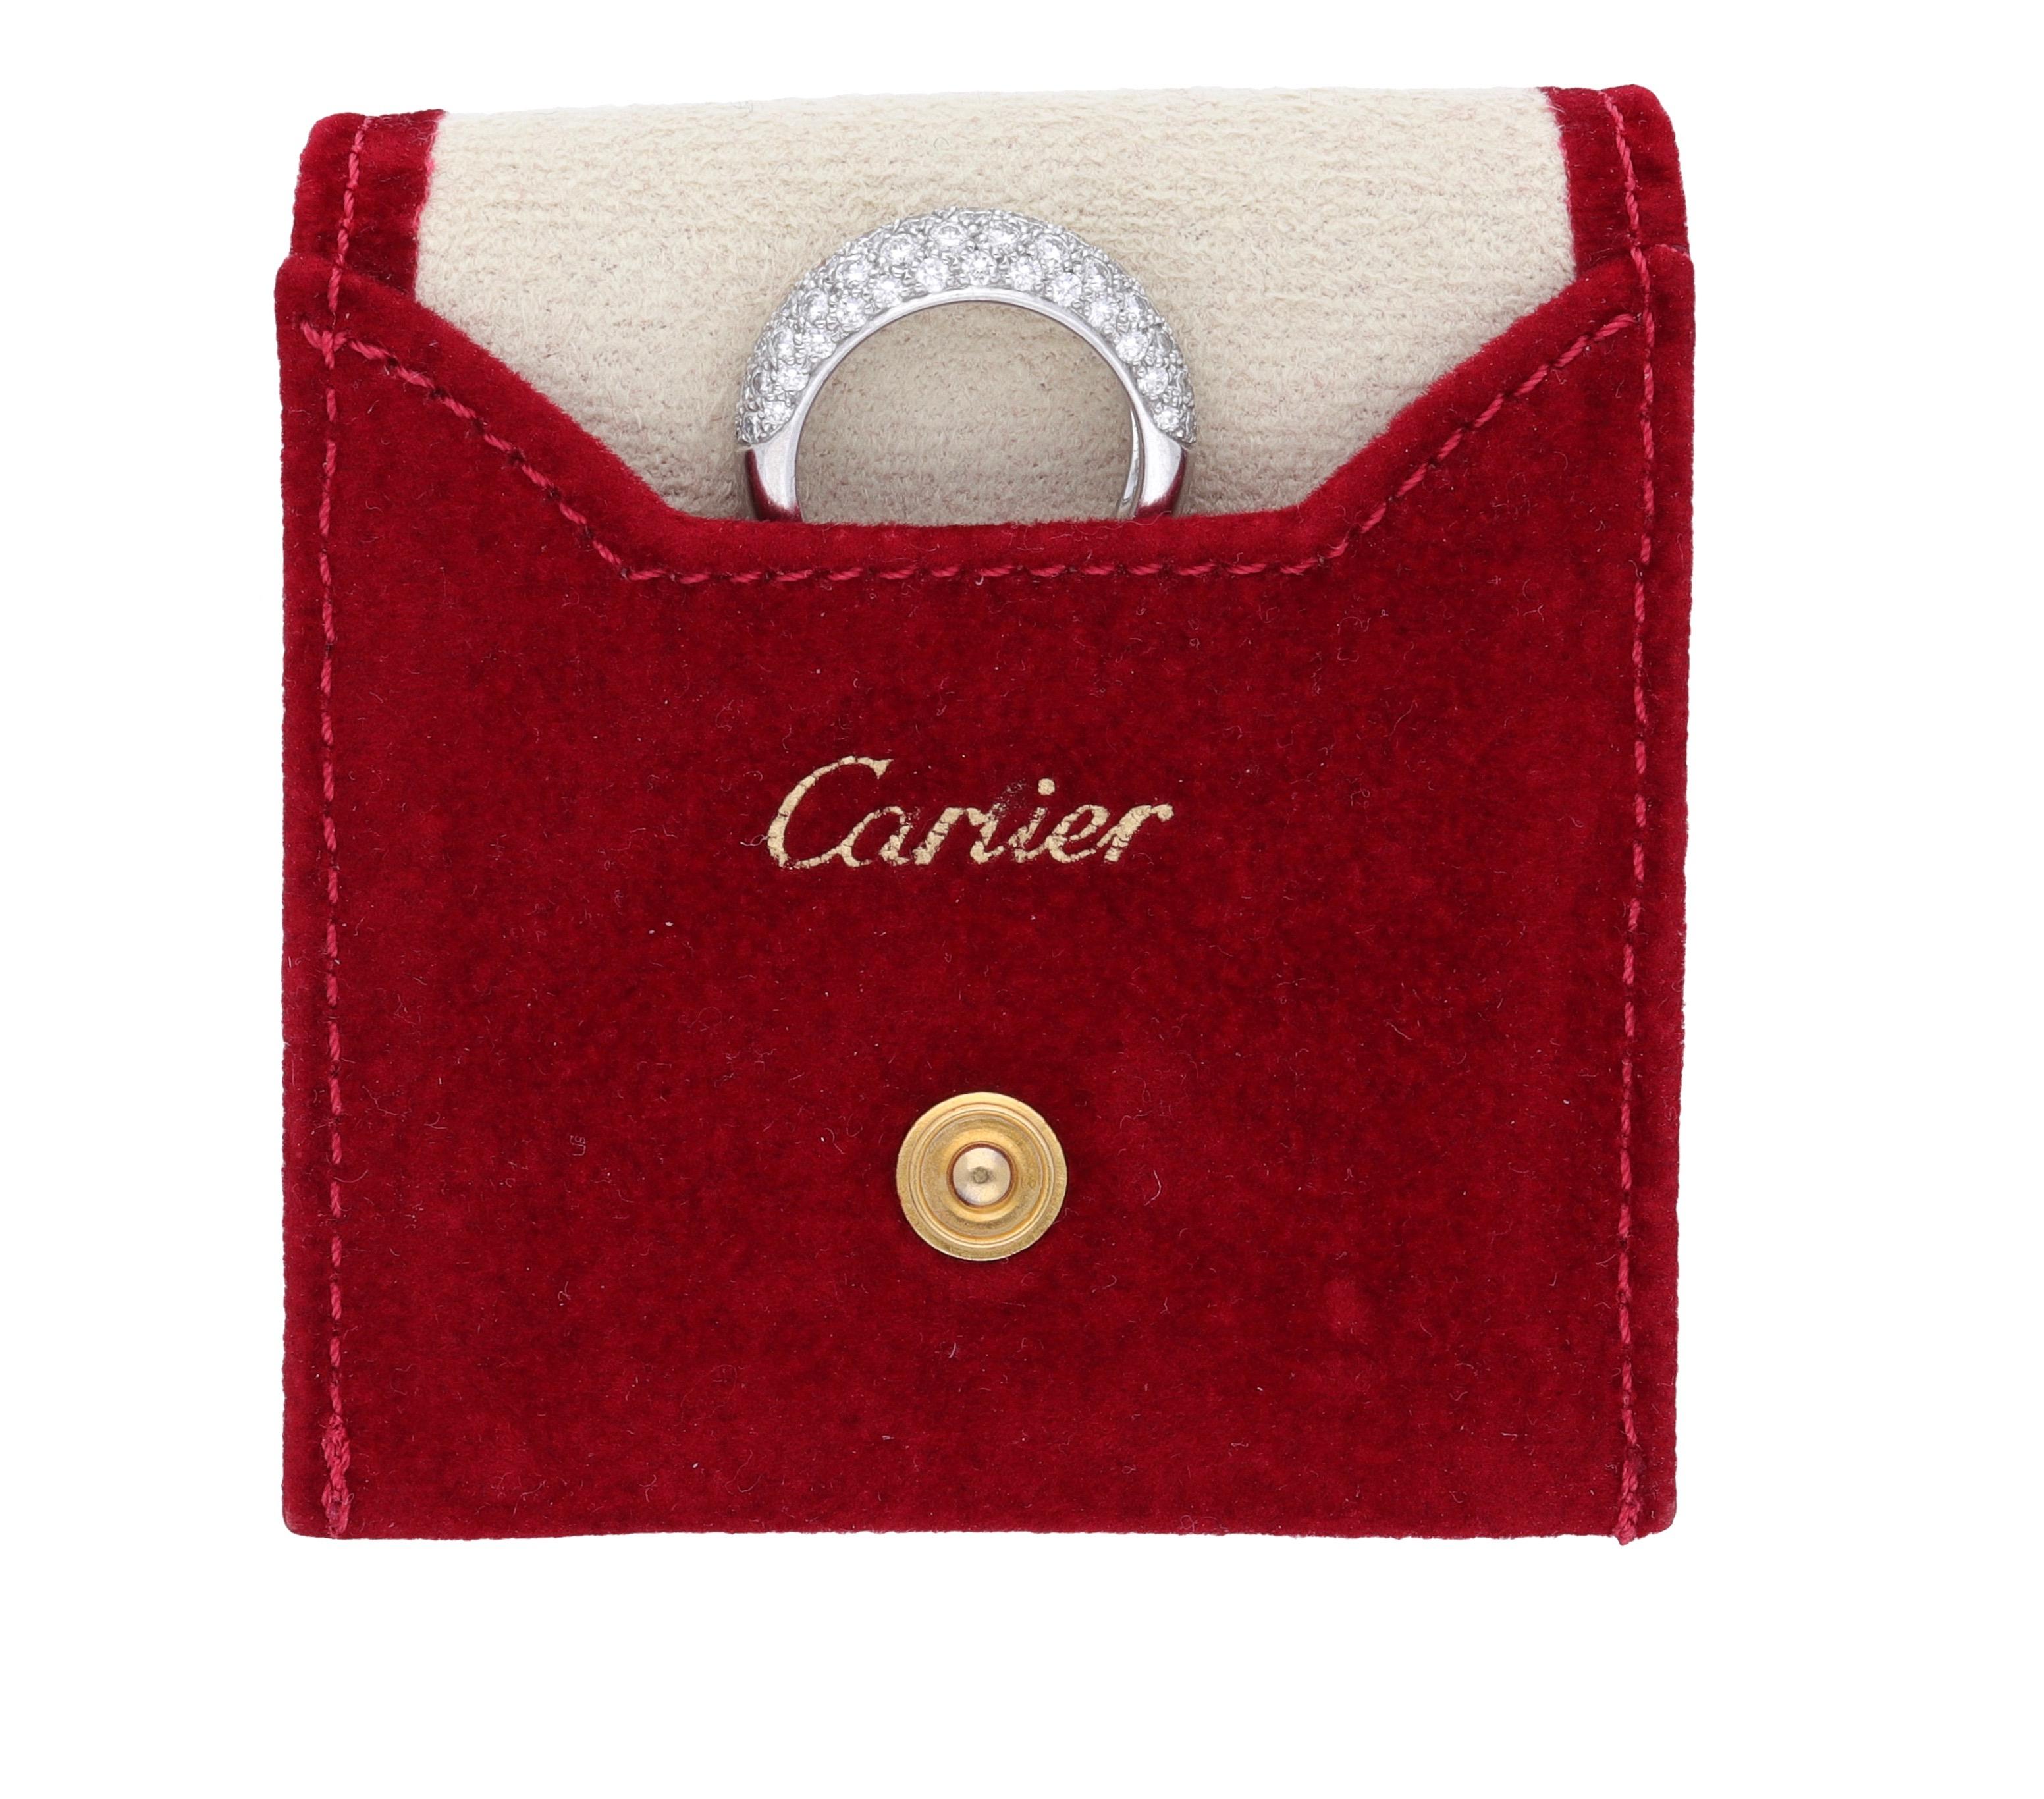 18 kt. white gold bombe ring signed by Cartier.
This classic ring is realized with 1.30 carat of round-cut diamonds and comes in the original red pouch.
Ring size is 6